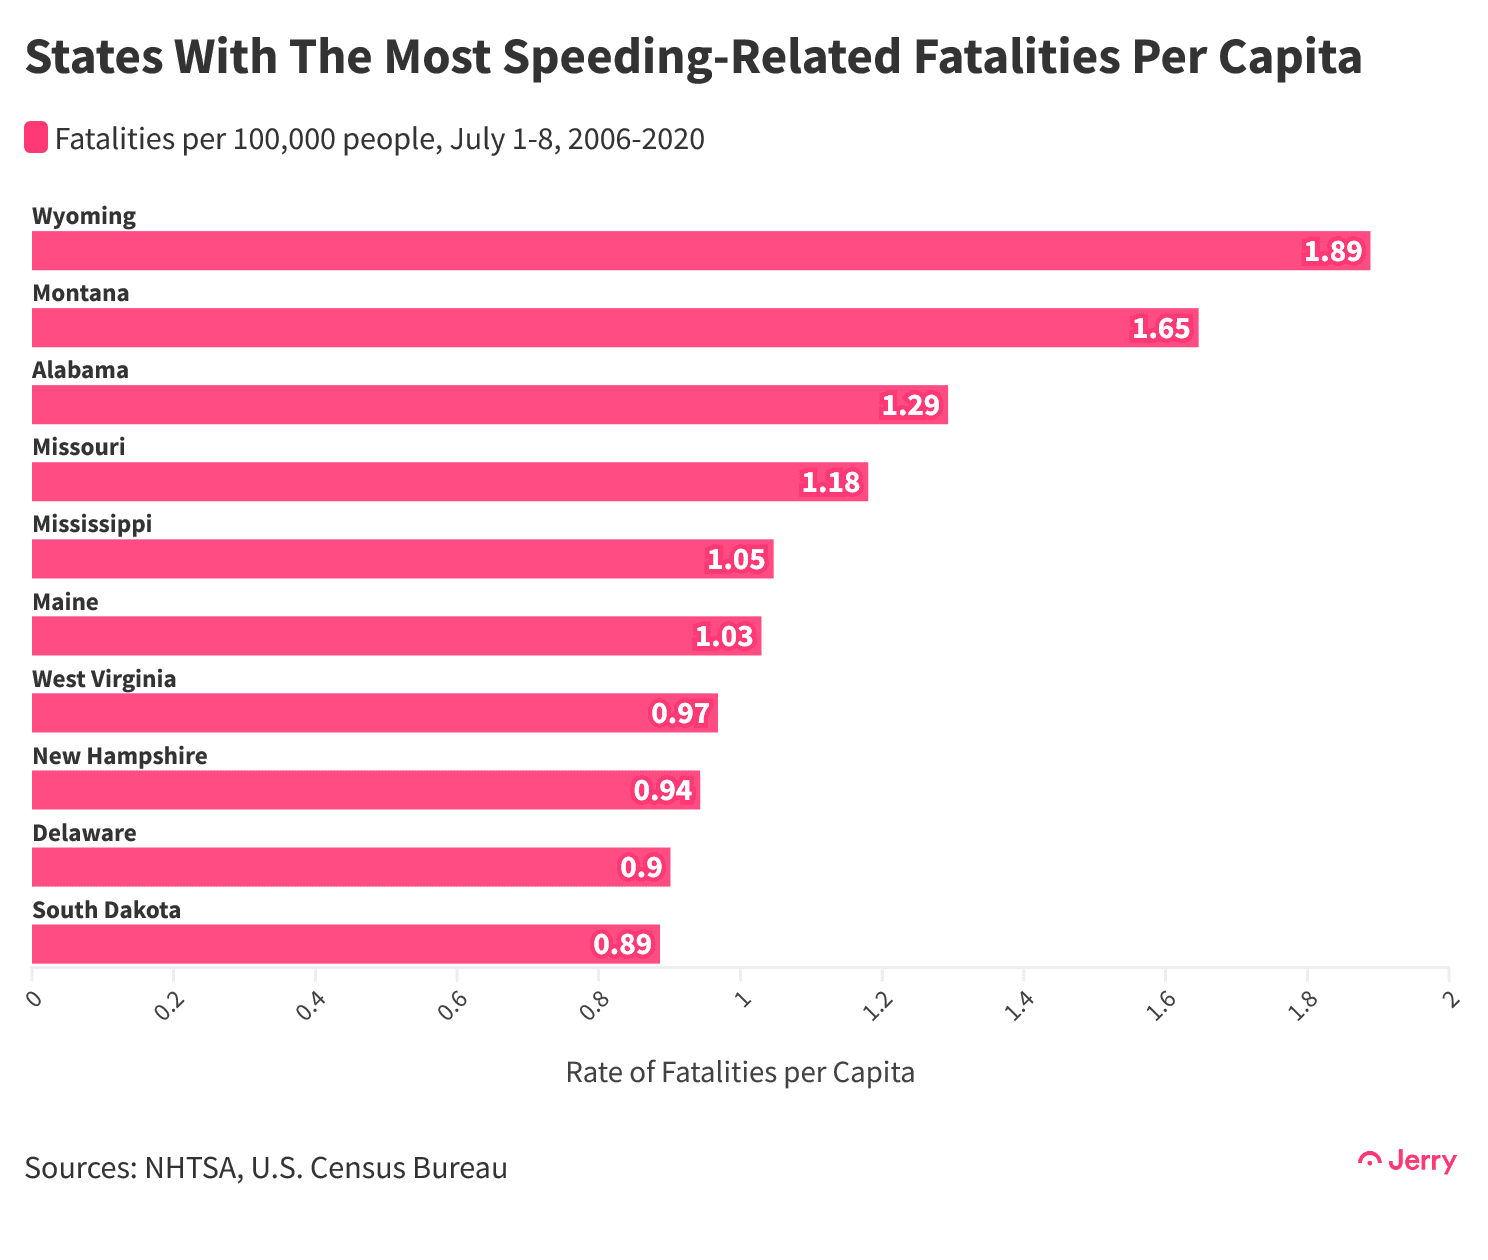 States With The Most Speeding-Related Fatalities Per Capita, 2006-2020@2x(1)